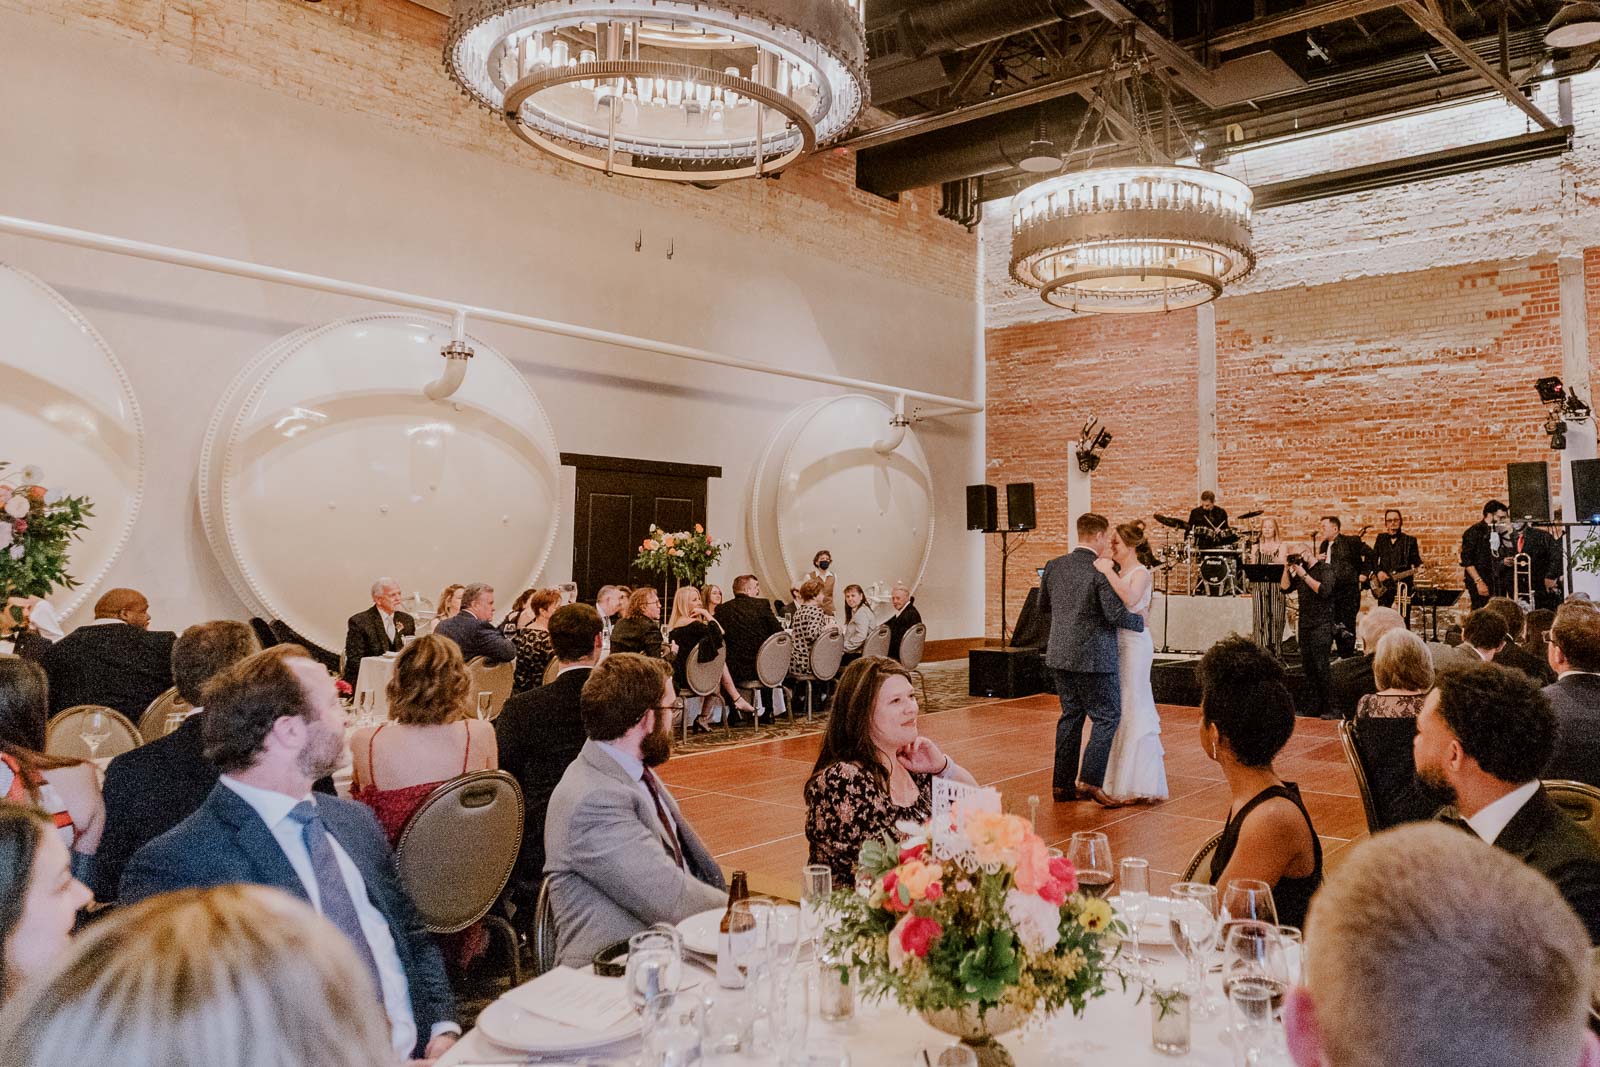 The couples first dance shows a wide-angle view of the elephant cellar 